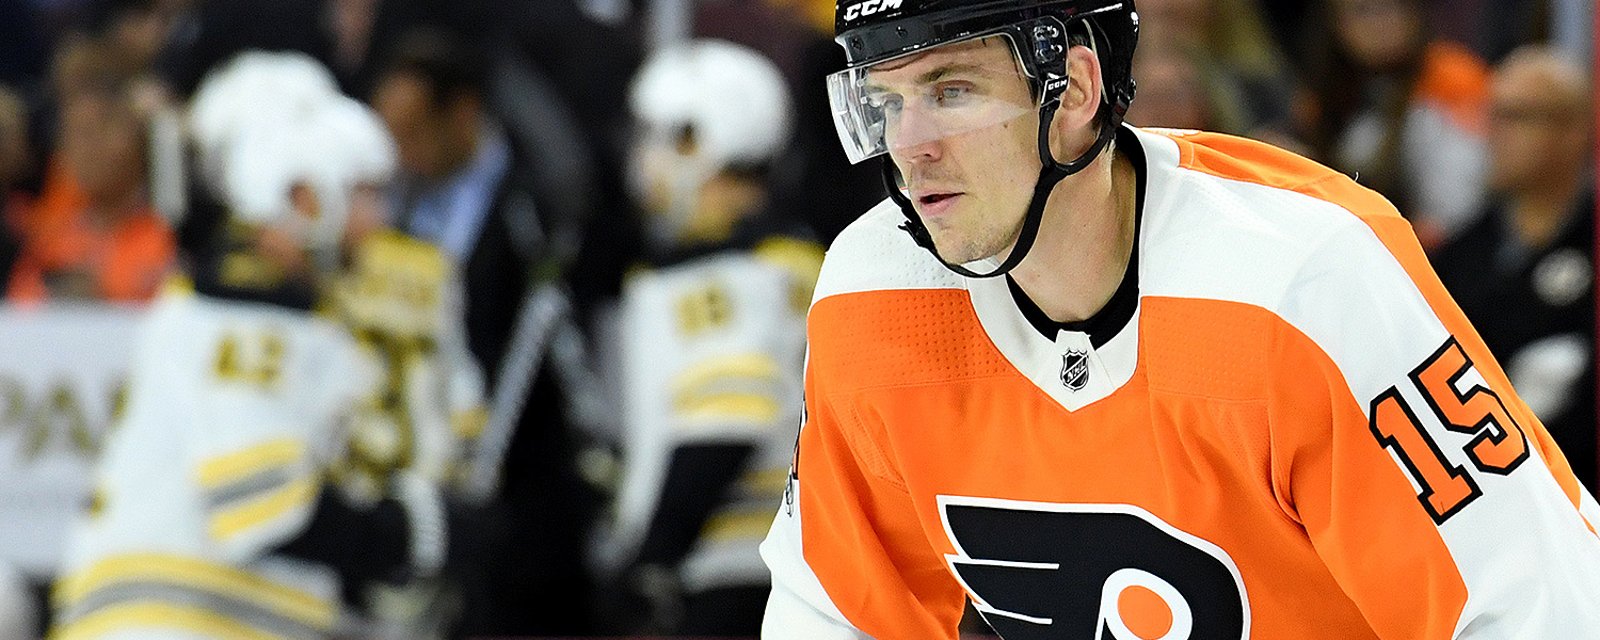 Breaking: NHL makes the right call on Lehtera following cocaine ring story 